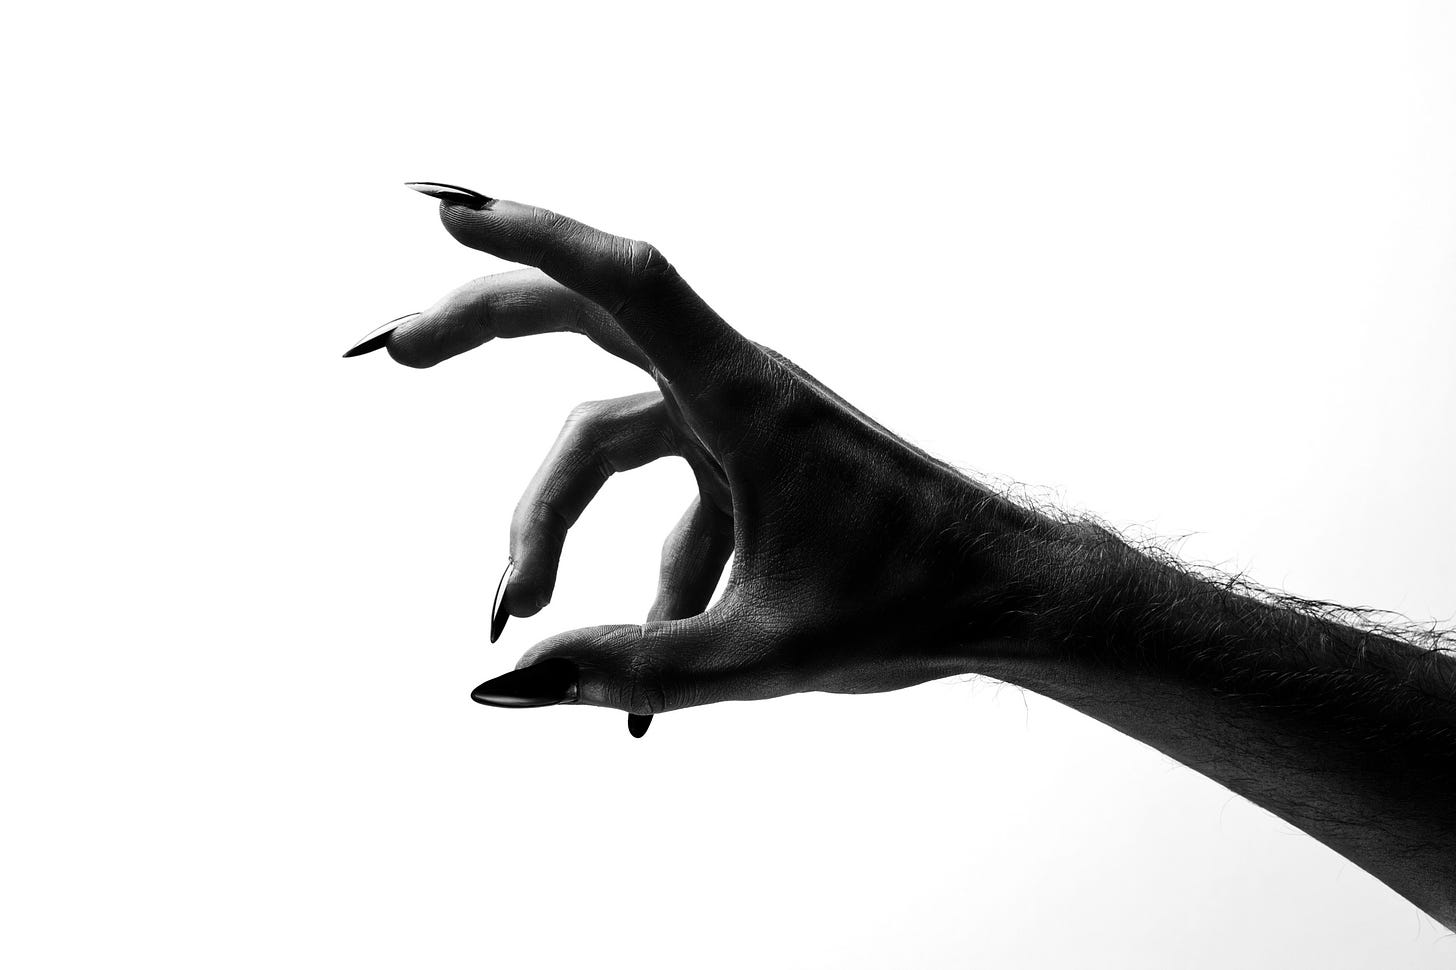 A dark clawed hand reaches sinisterly against a white background.